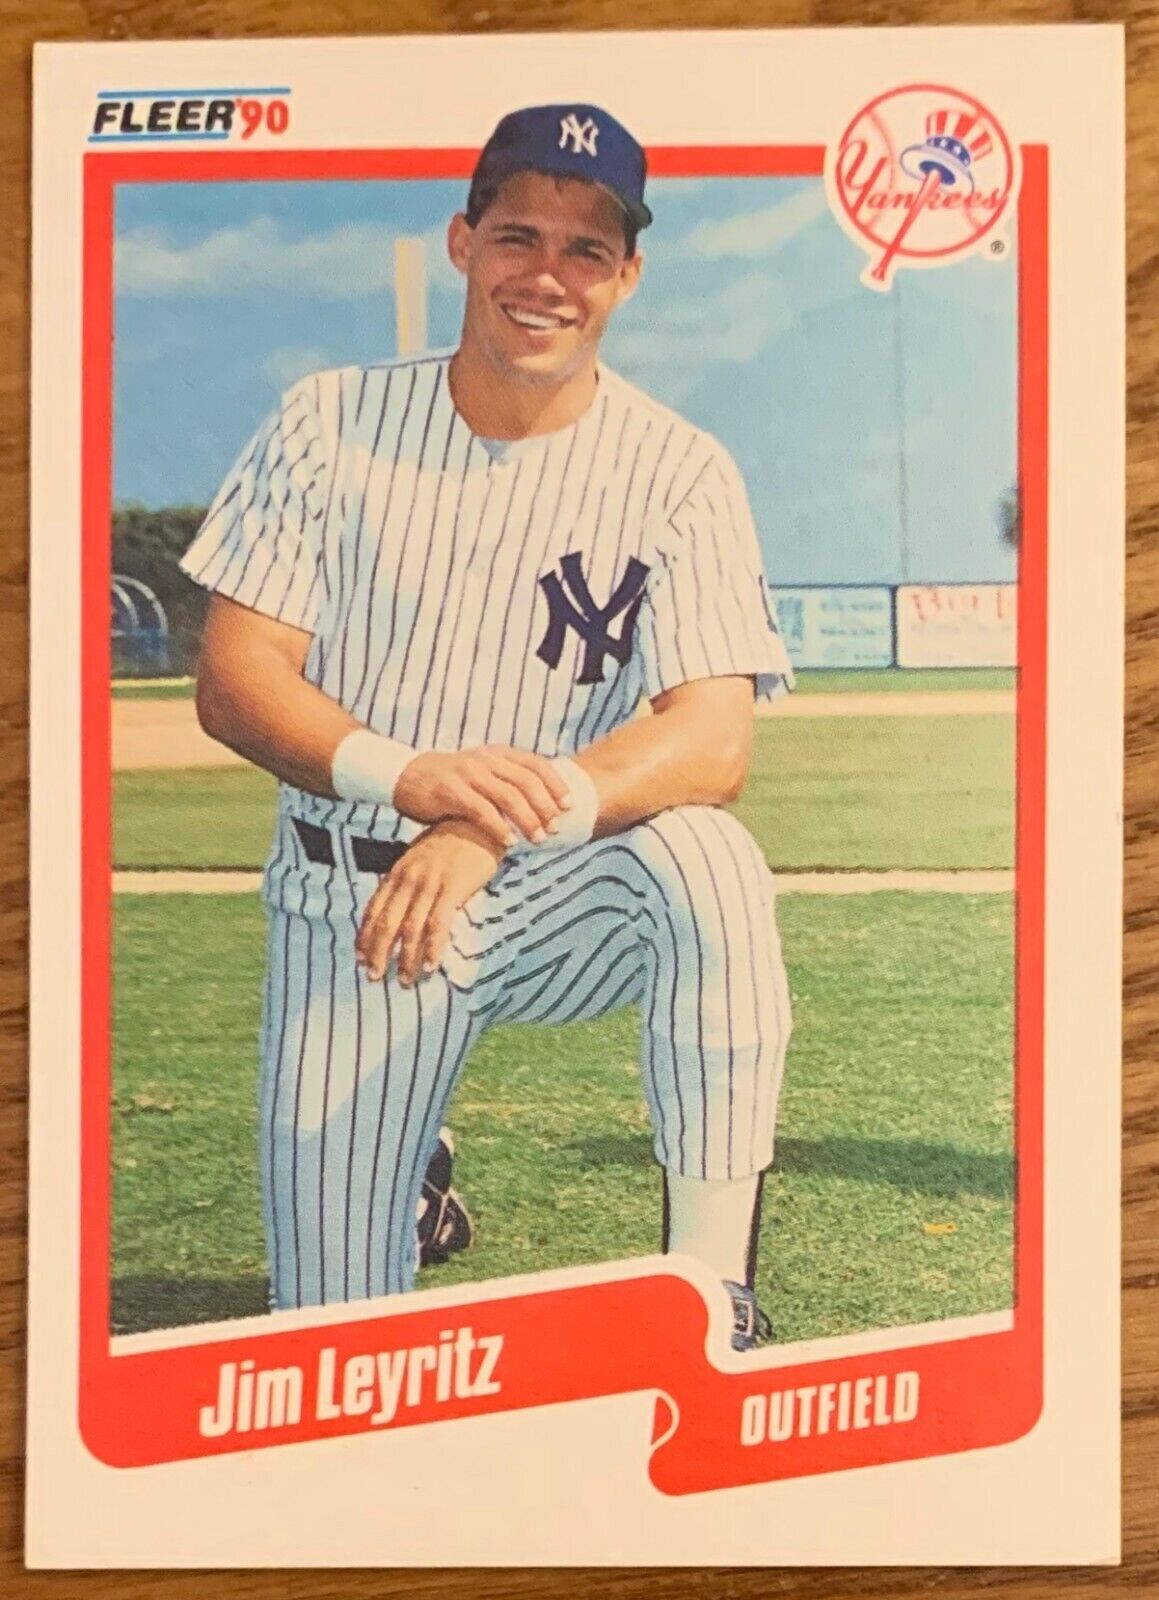 JIM LEYRITZ, 1990 FLEER UPDATE ROOKIE CARD, EXCELLENT CONDITION ! AMAZING !. rookie card picture